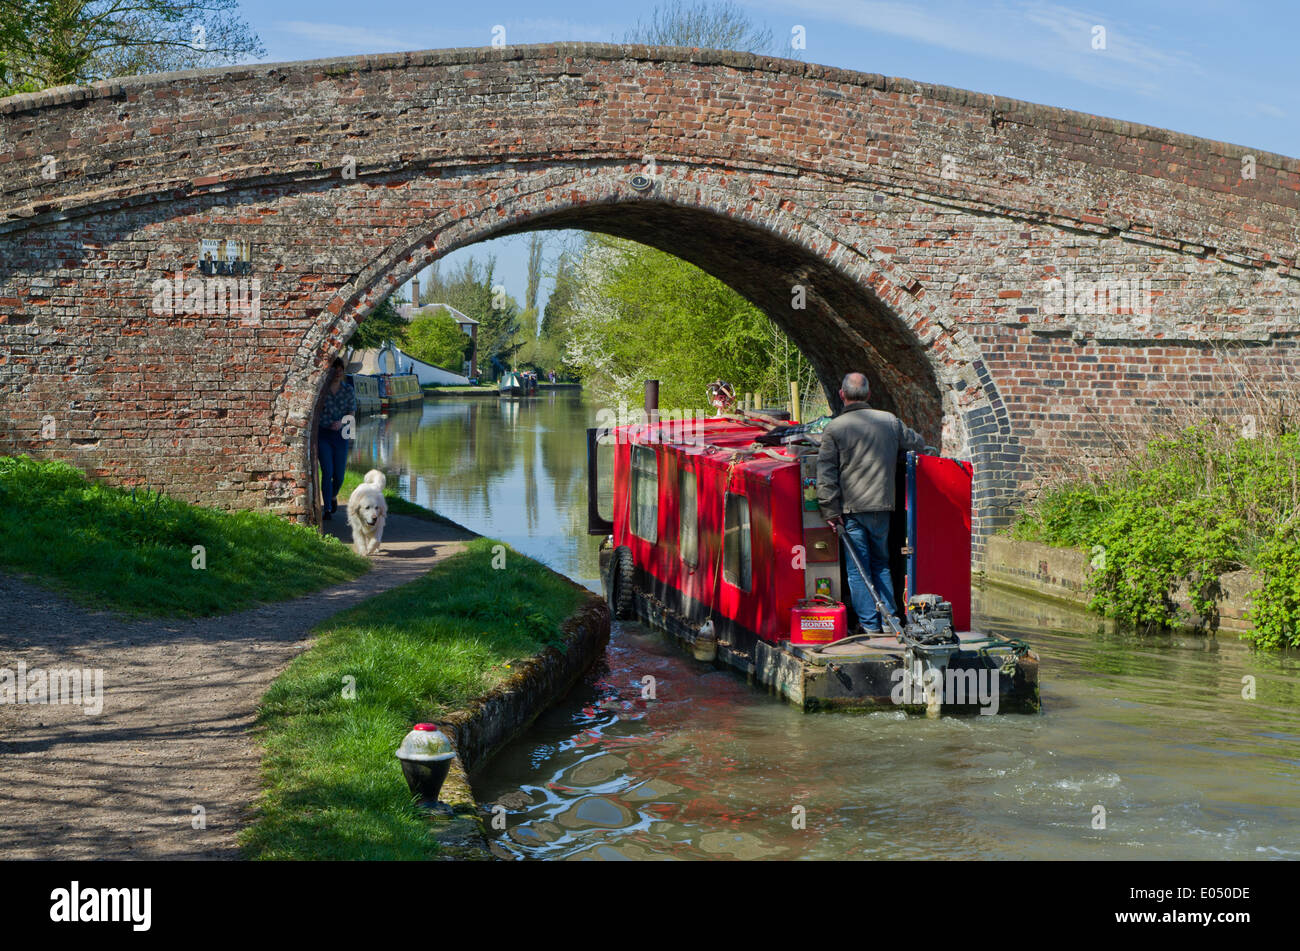 A maintenance boat going under a bridge on the Oxford canal at Braunston, UK Stock Photo